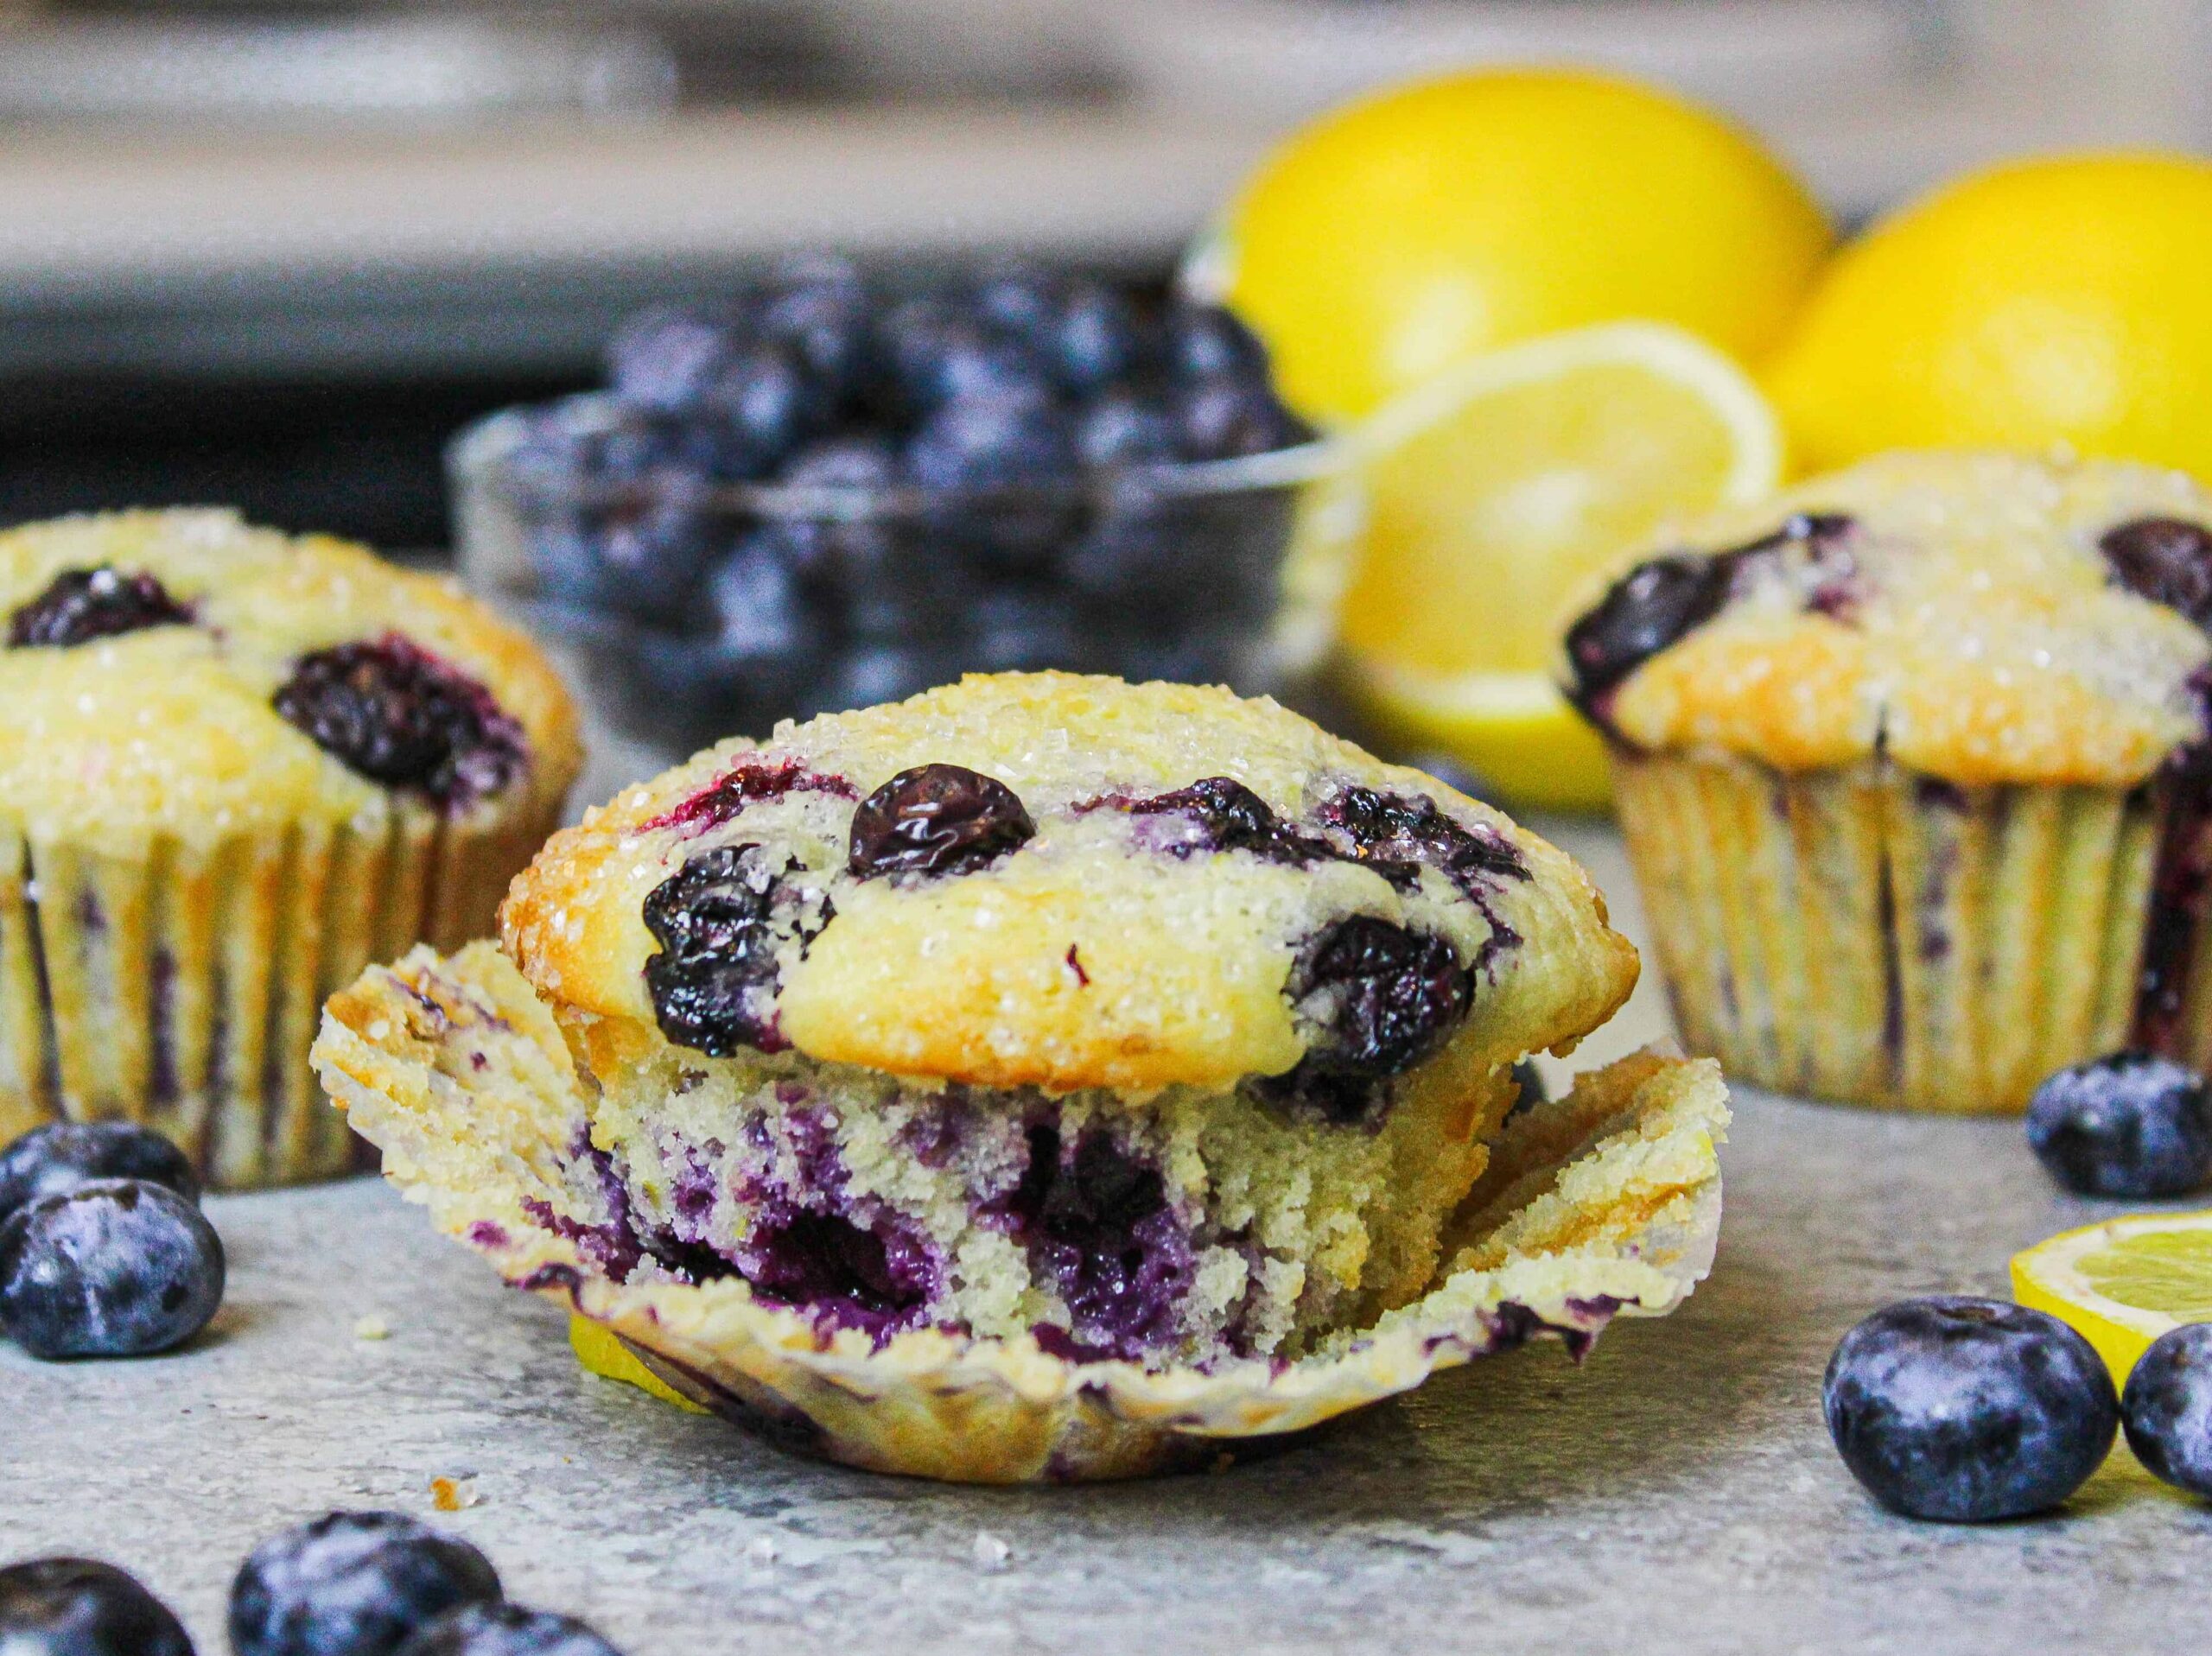 image of blueberry muffin surrounded by other muffins and fresh blueberries
